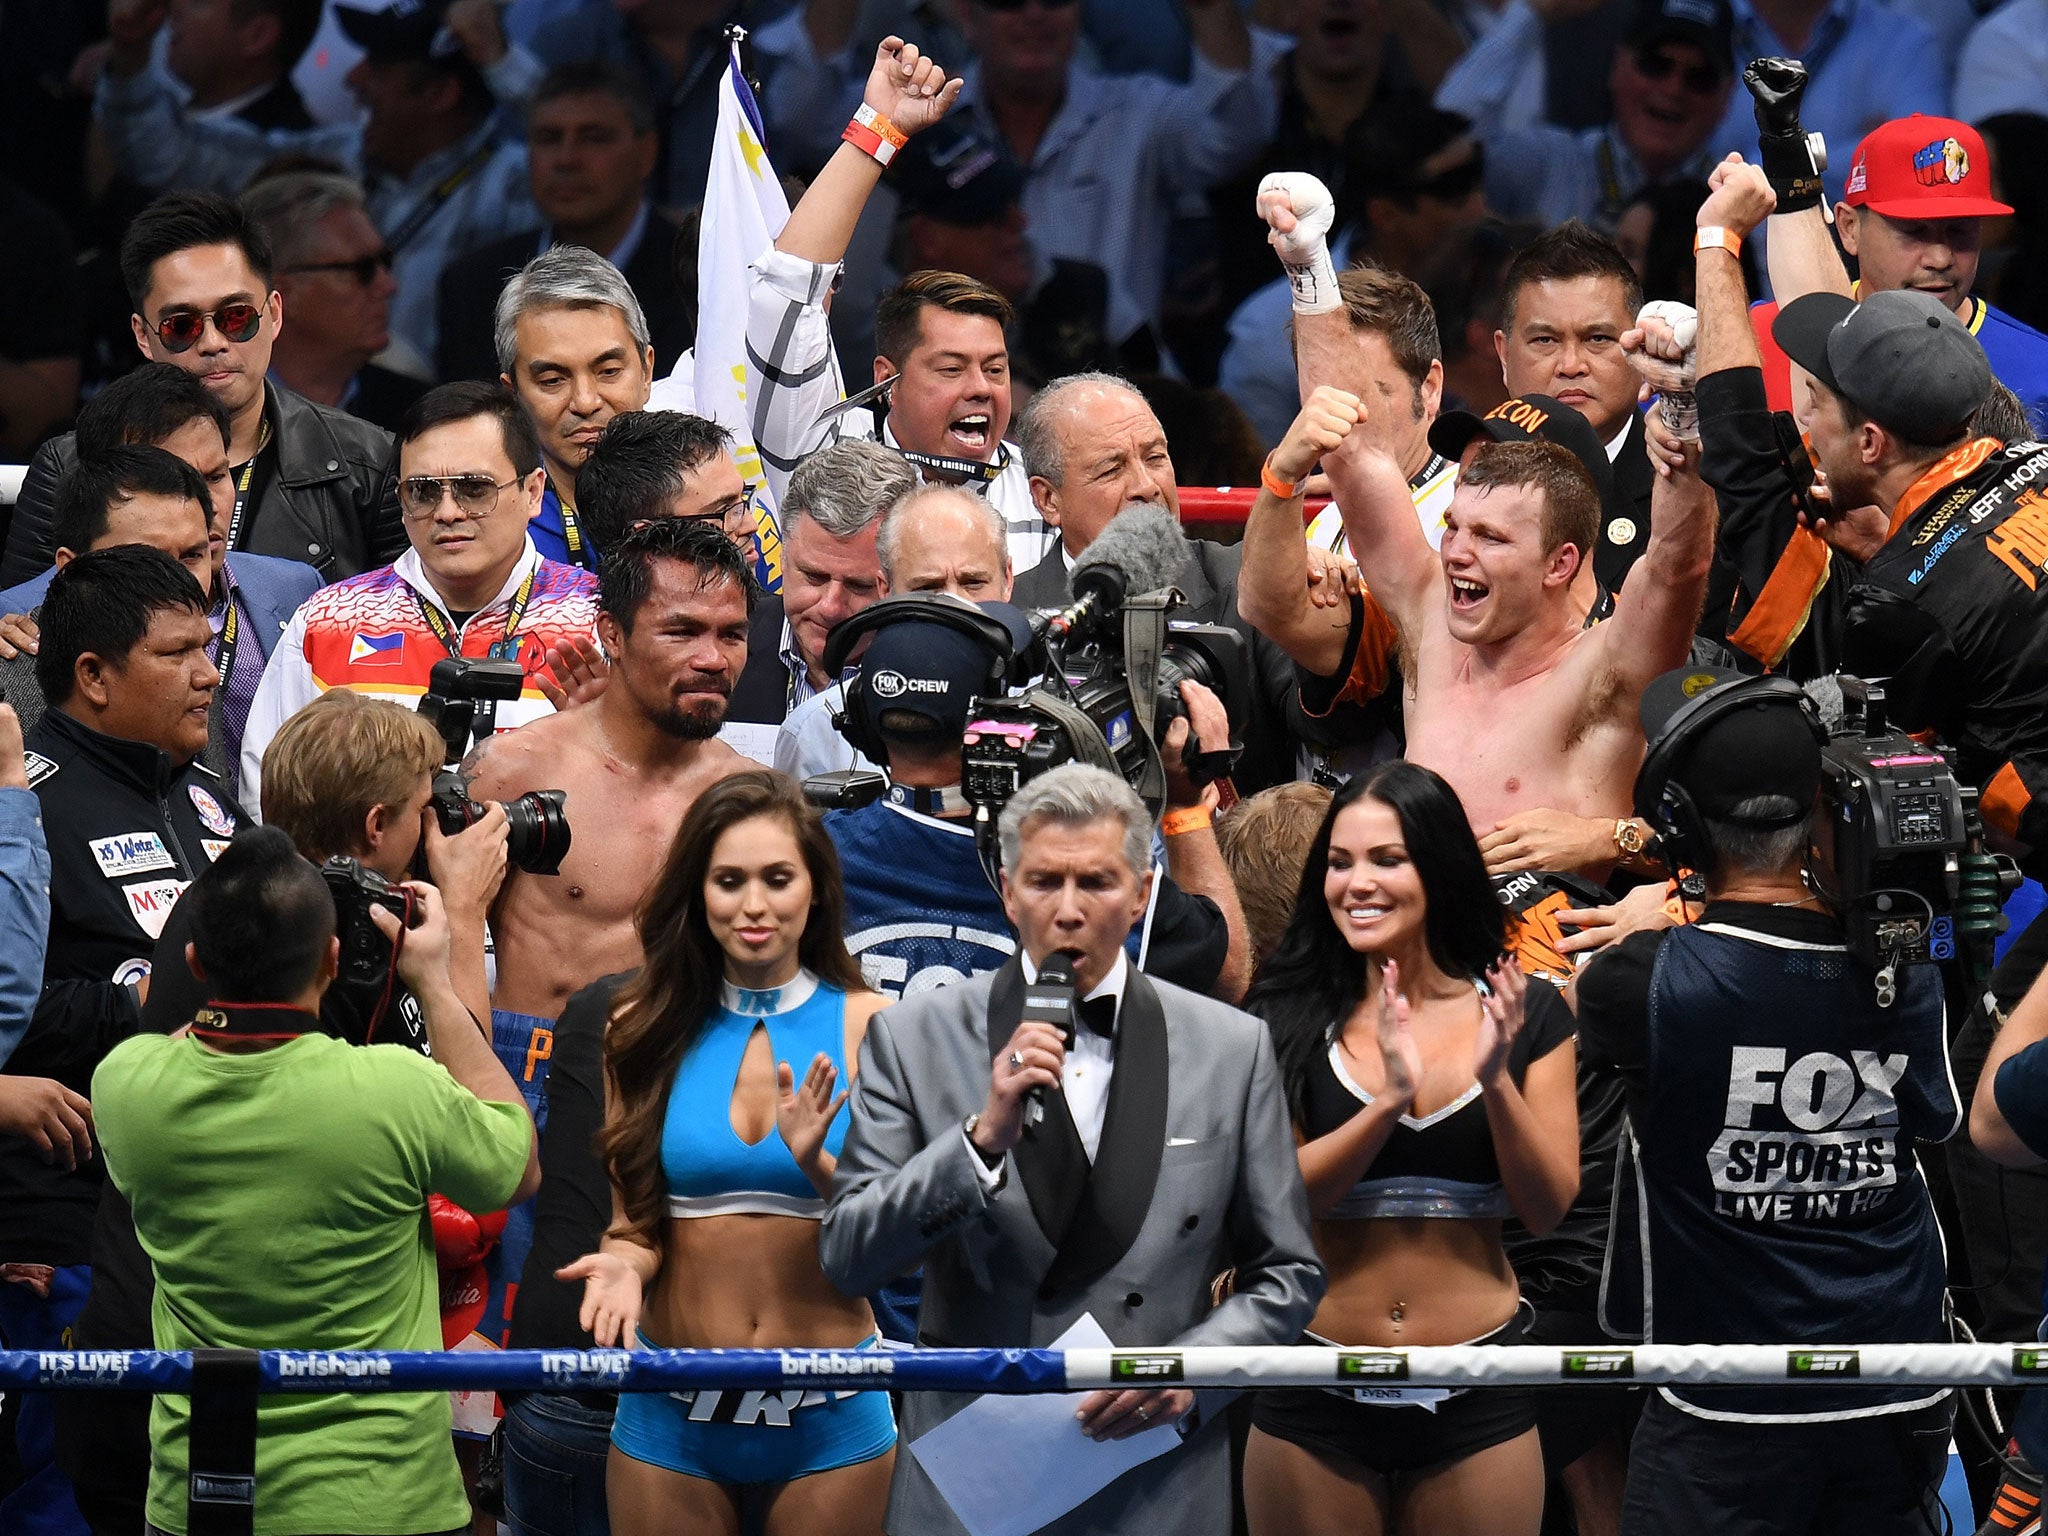 Jeff Horn (R) of Australia celebrates defeating Manny Pacquiao of the Philippines after their WBO World Welterweight title boxing match